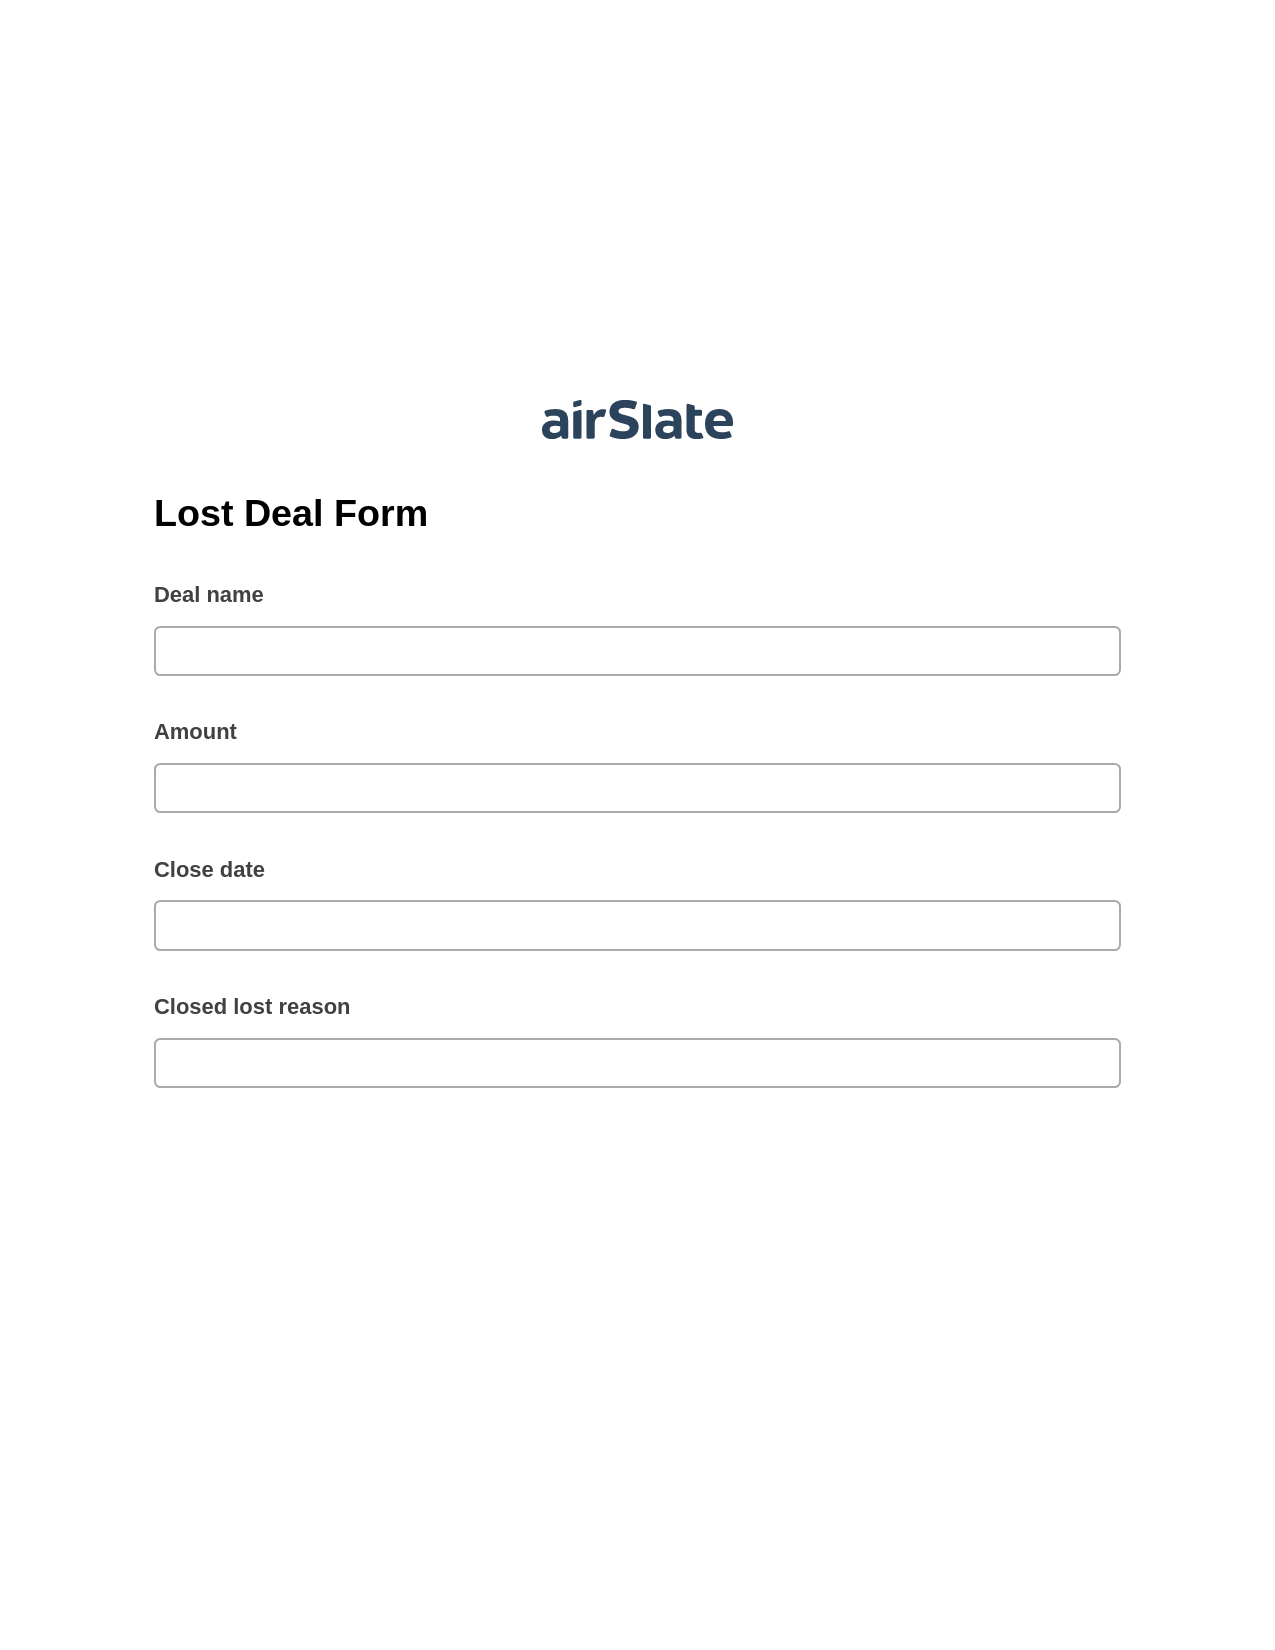 Lost Deal Form Pre-fill from CSV File Bot, Slack Notification Bot, Post-finish Document Bot